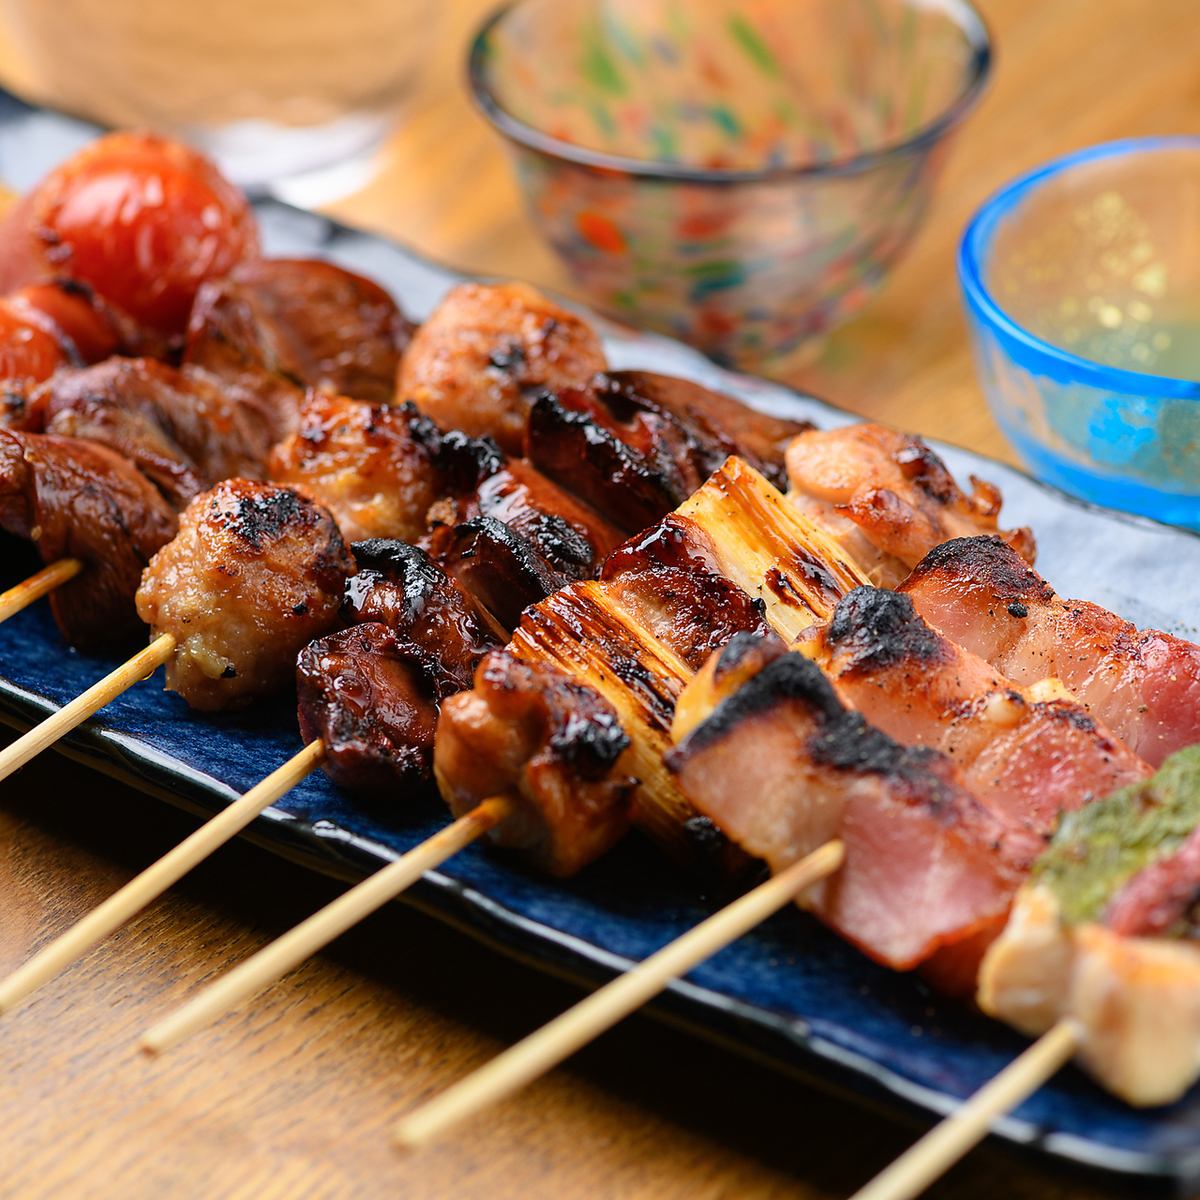 A charcoal-grilled chicken restaurant with delicious wine♪ All-you-can-drink courses start at 5,000 JPY (incl. tax)